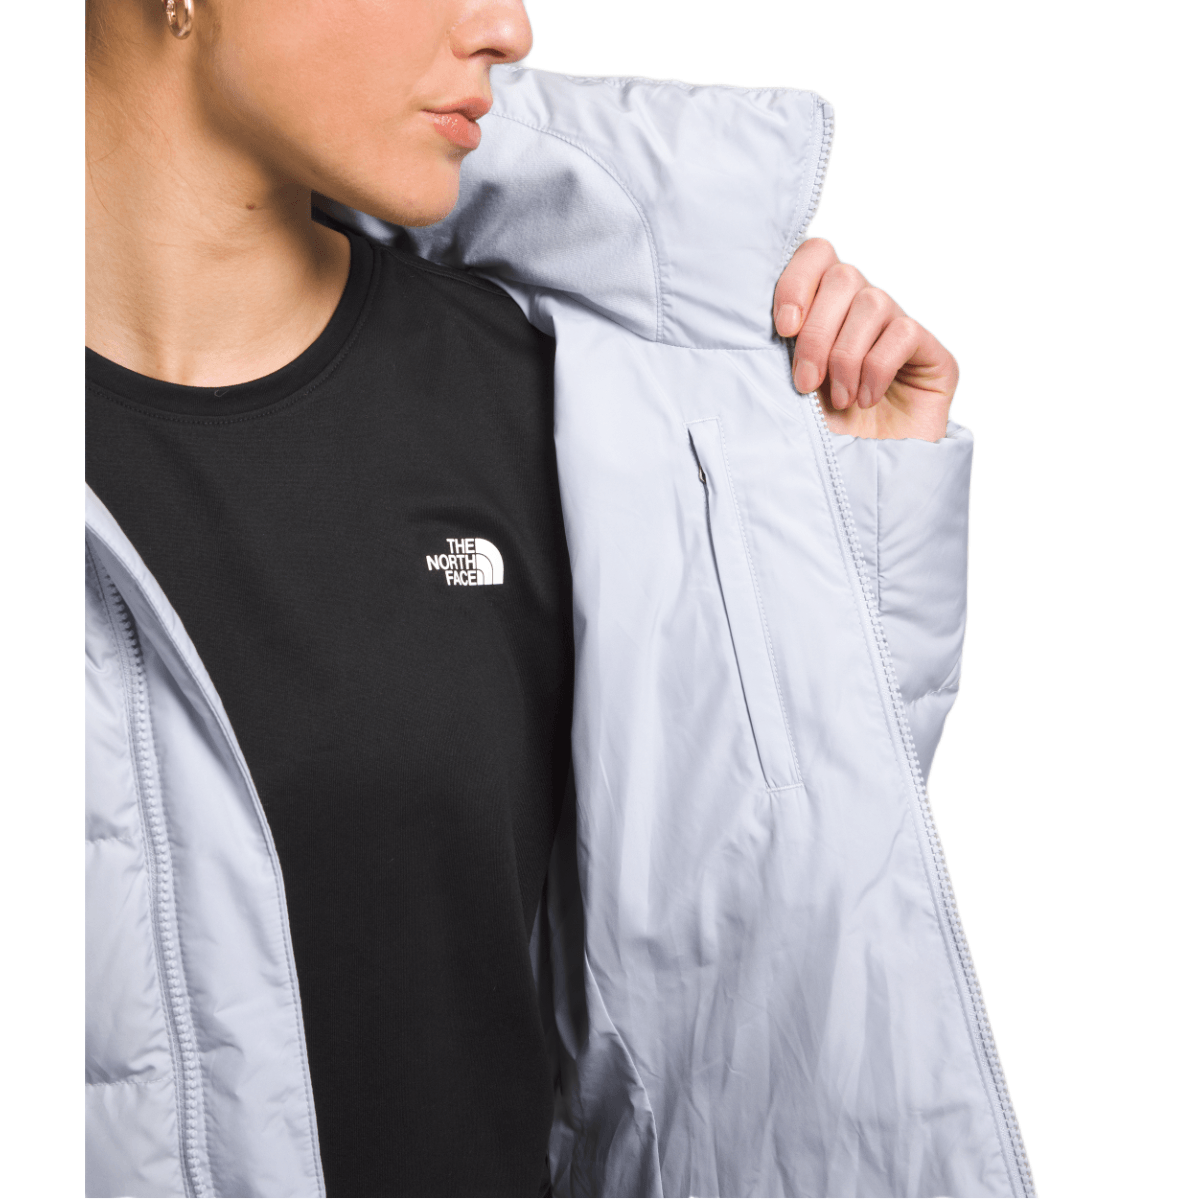 The North Face Metropolis Jacket - Women's - Al's Sporting Goods: Your  One-Stop Shop for Outdoor Sports Gear & Apparel